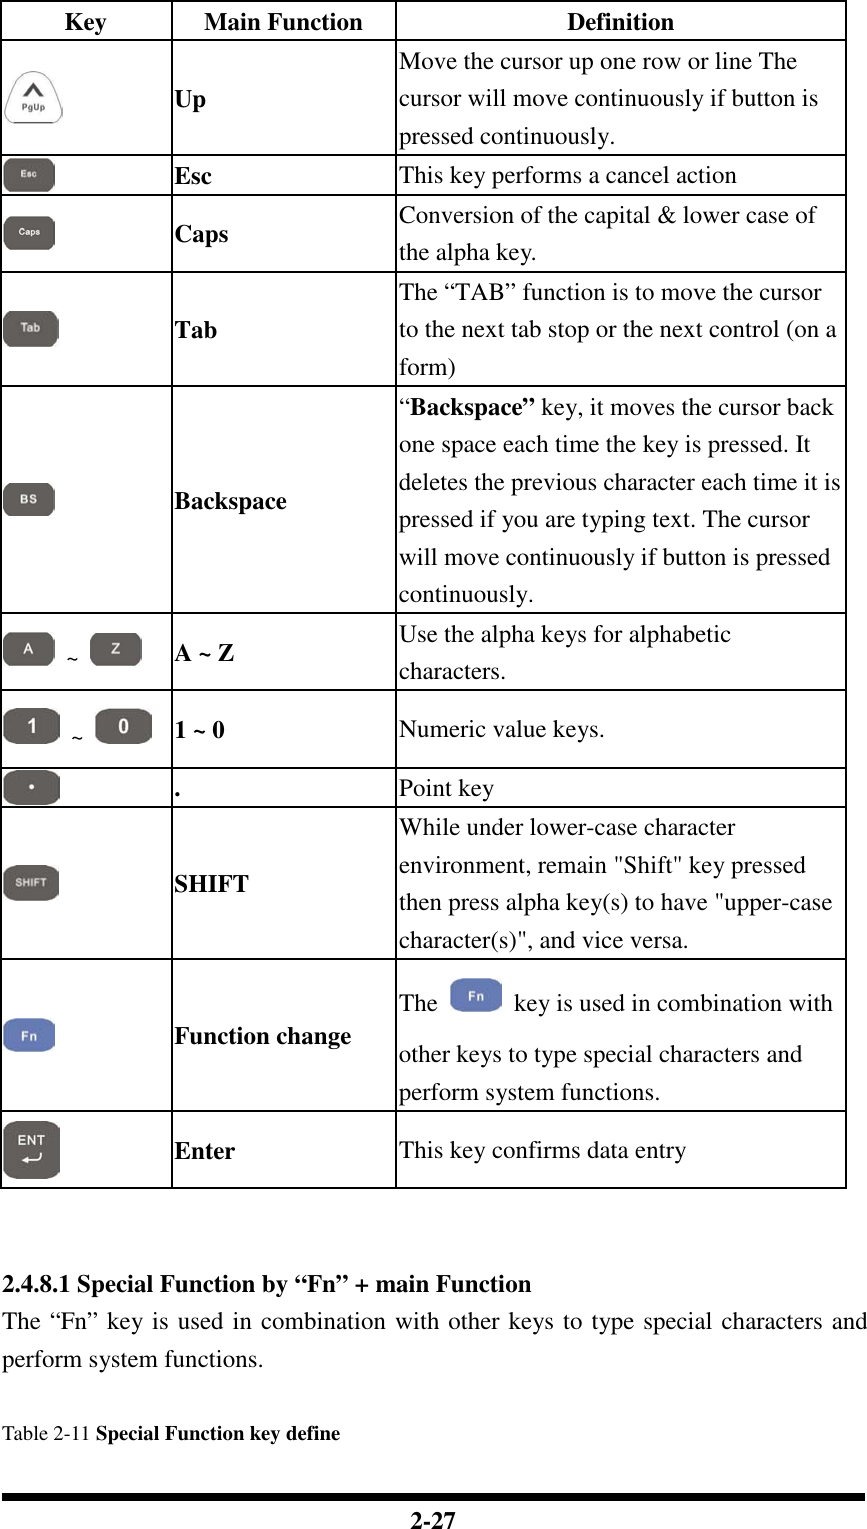  2-27 Key  Main Function  Definition  Up Move the cursor up one row or line The cursor will move continuously if button is pressed continuously.  Esc  This key performs a cancel action  Caps  Conversion of the capital &amp; lower case of the alpha key.  Tab The “TAB” function is to move the cursor to the next tab stop or the next control (on a form)  Backspace “Backspace” key, it moves the cursor back one space each time the key is pressed. It deletes the previous character each time it is pressed if you are typing text. The cursor will move continuously if button is pressed continuously.   ~   A ~ Z  Use the alpha keys for alphabetic characters.   ~   1 ~ 0  Numeric value keys.  .  Point key  SHIFT While under lower-case character environment, remain &quot;Shift&quot; key pressed then press alpha key(s) to have &quot;upper-case character(s)&quot;, and vice versa.  Function change The    key is used in combination with other keys to type special characters and perform system functions.  Enter  This key confirms data entry   2.4.8.1 Special Function by “Fn” + main Function The “Fn” key is used in combination with other keys to type special characters and perform system functions.  Table 2-11 Special Function key define 